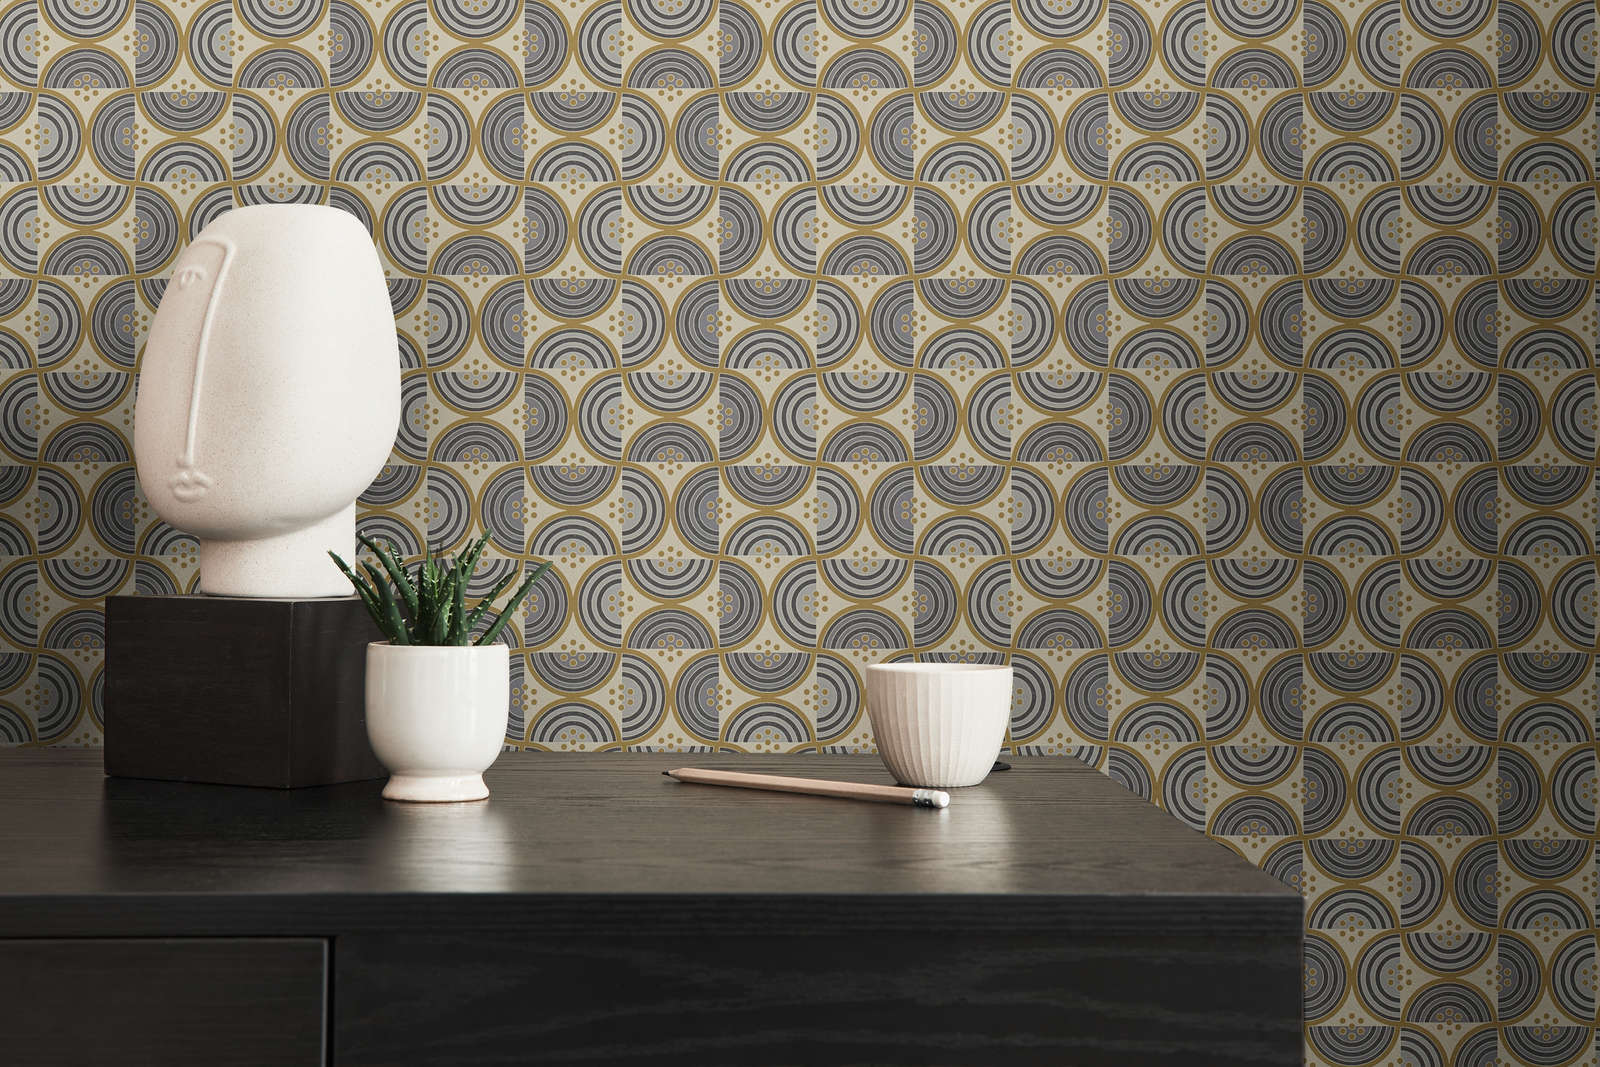             Non-woven wallpaper with square pattern of semicircles and dots - yellow, grey, black
        